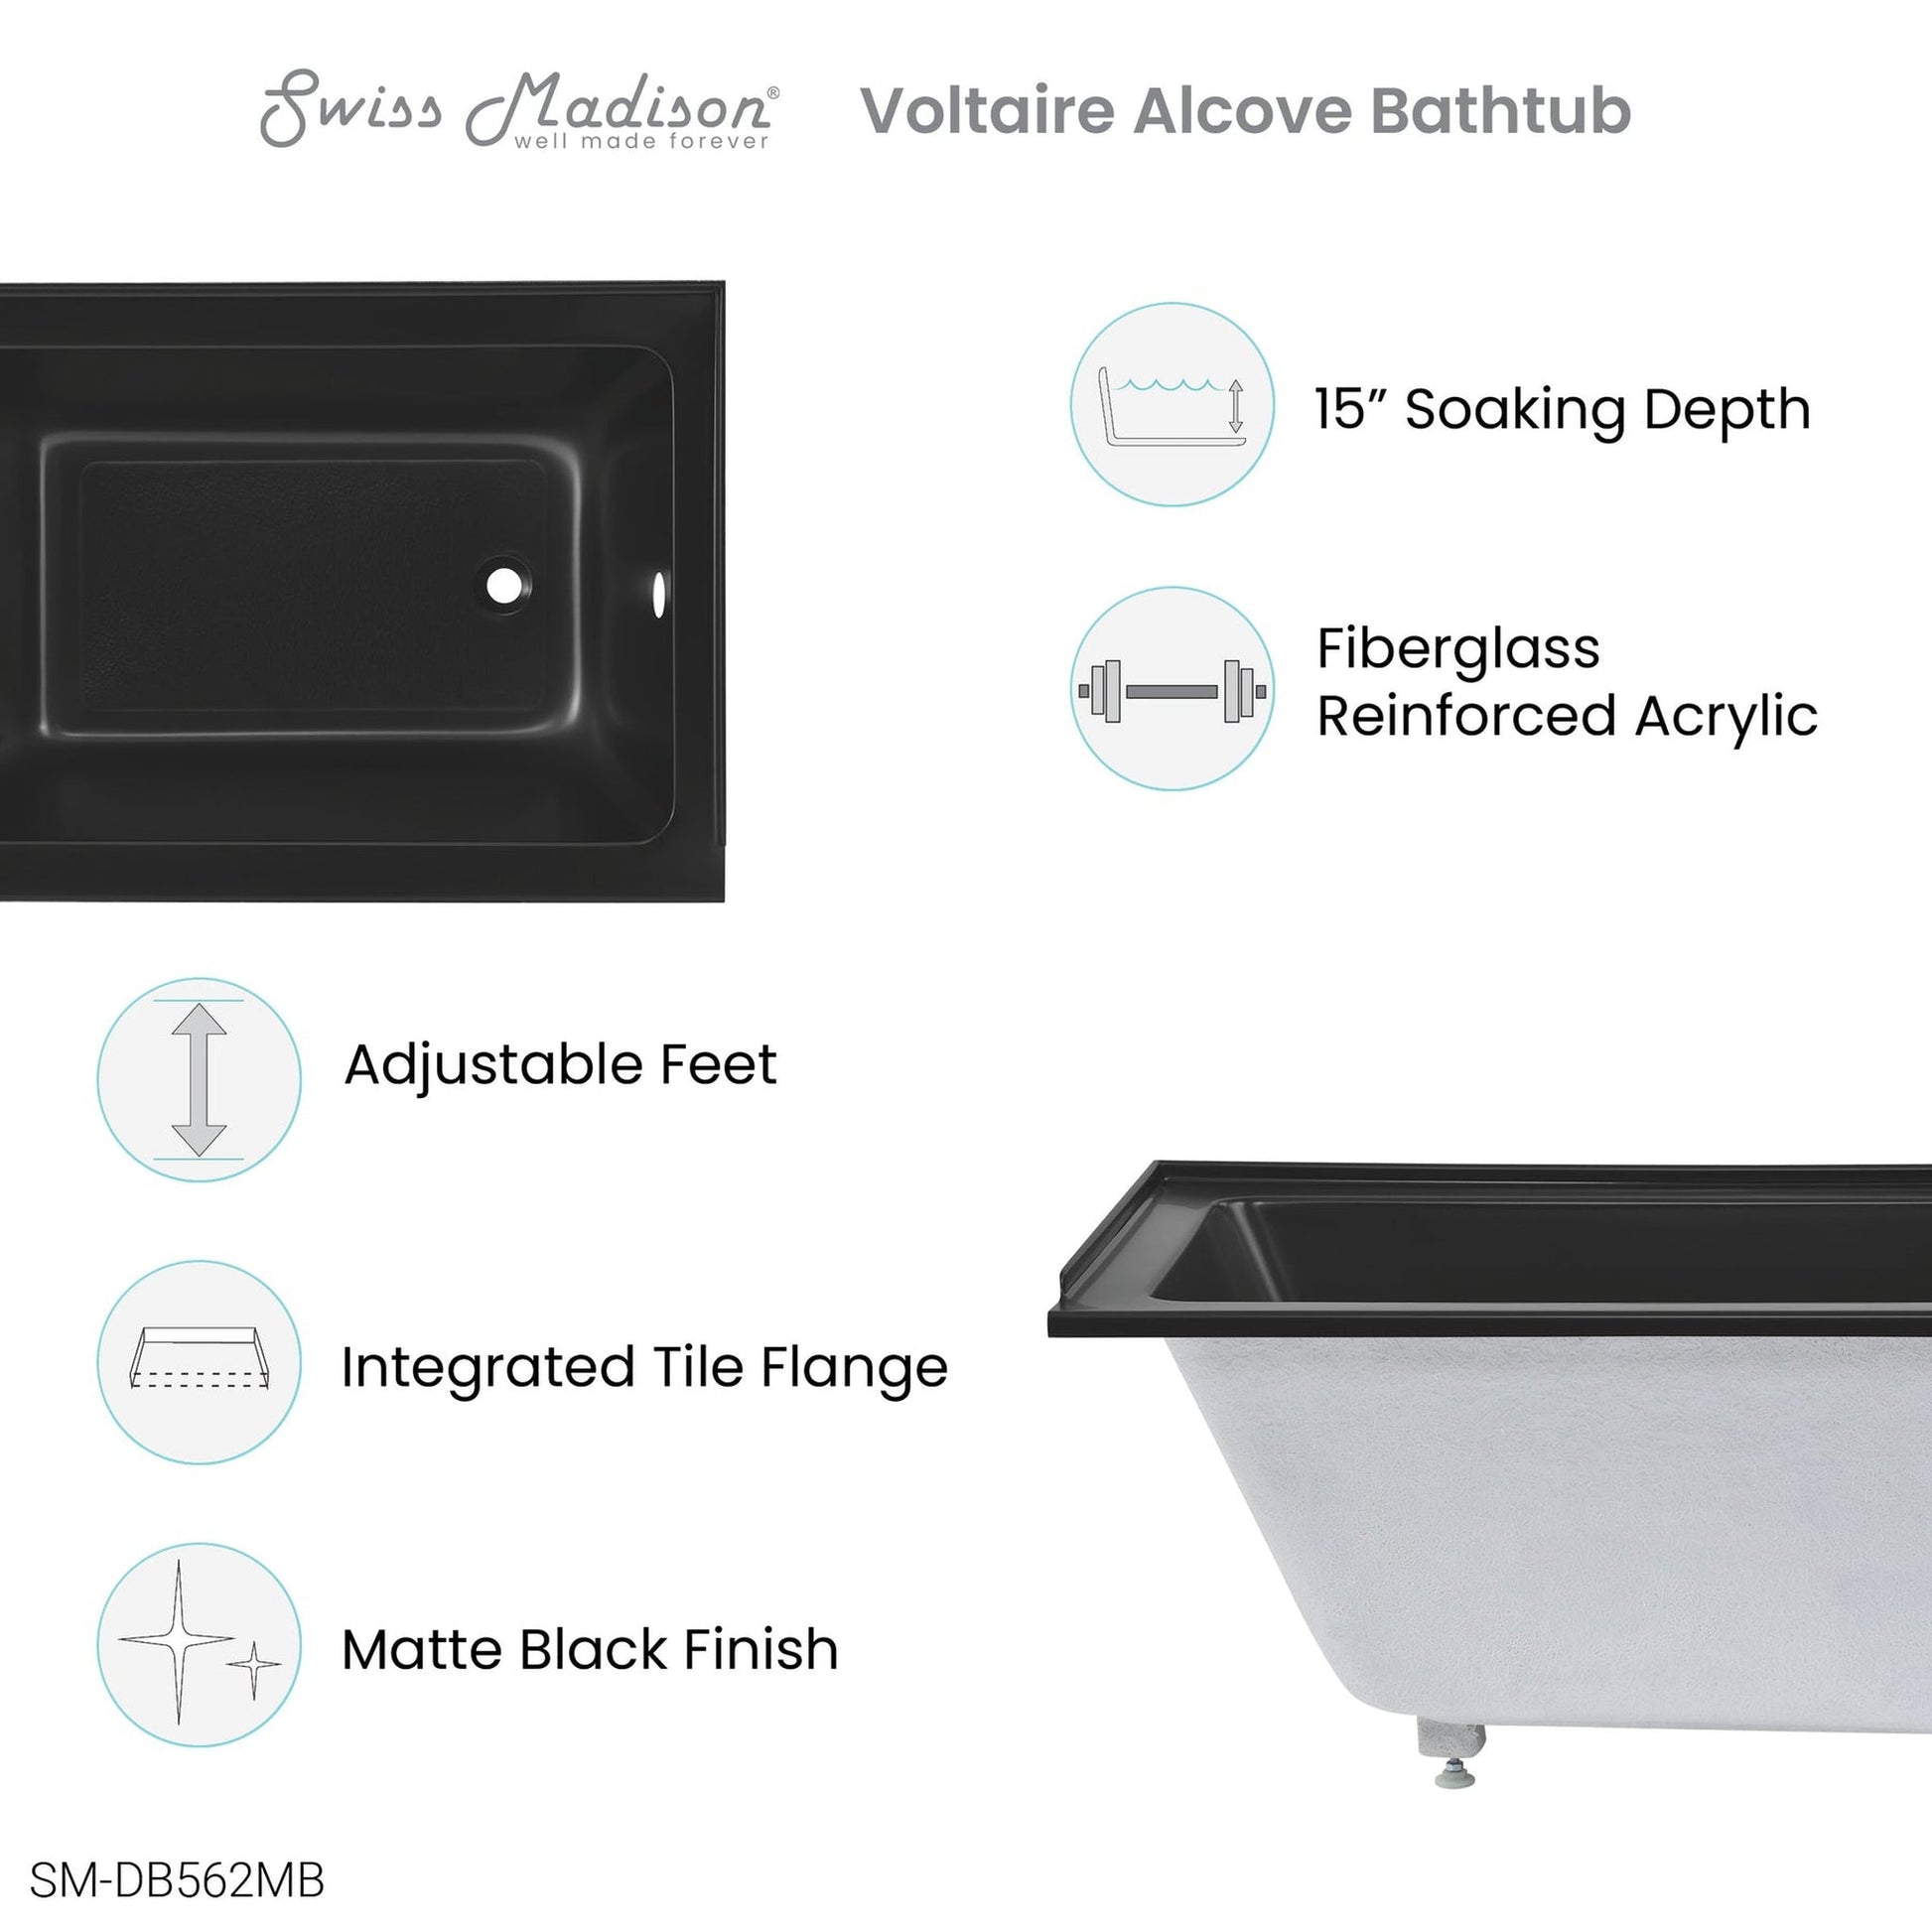 Swiss Madison Voltaire 48" x 32" Matte Black Right-Hand Drain Alcove Bathtub With Built-In Flange & Adjustable Feet